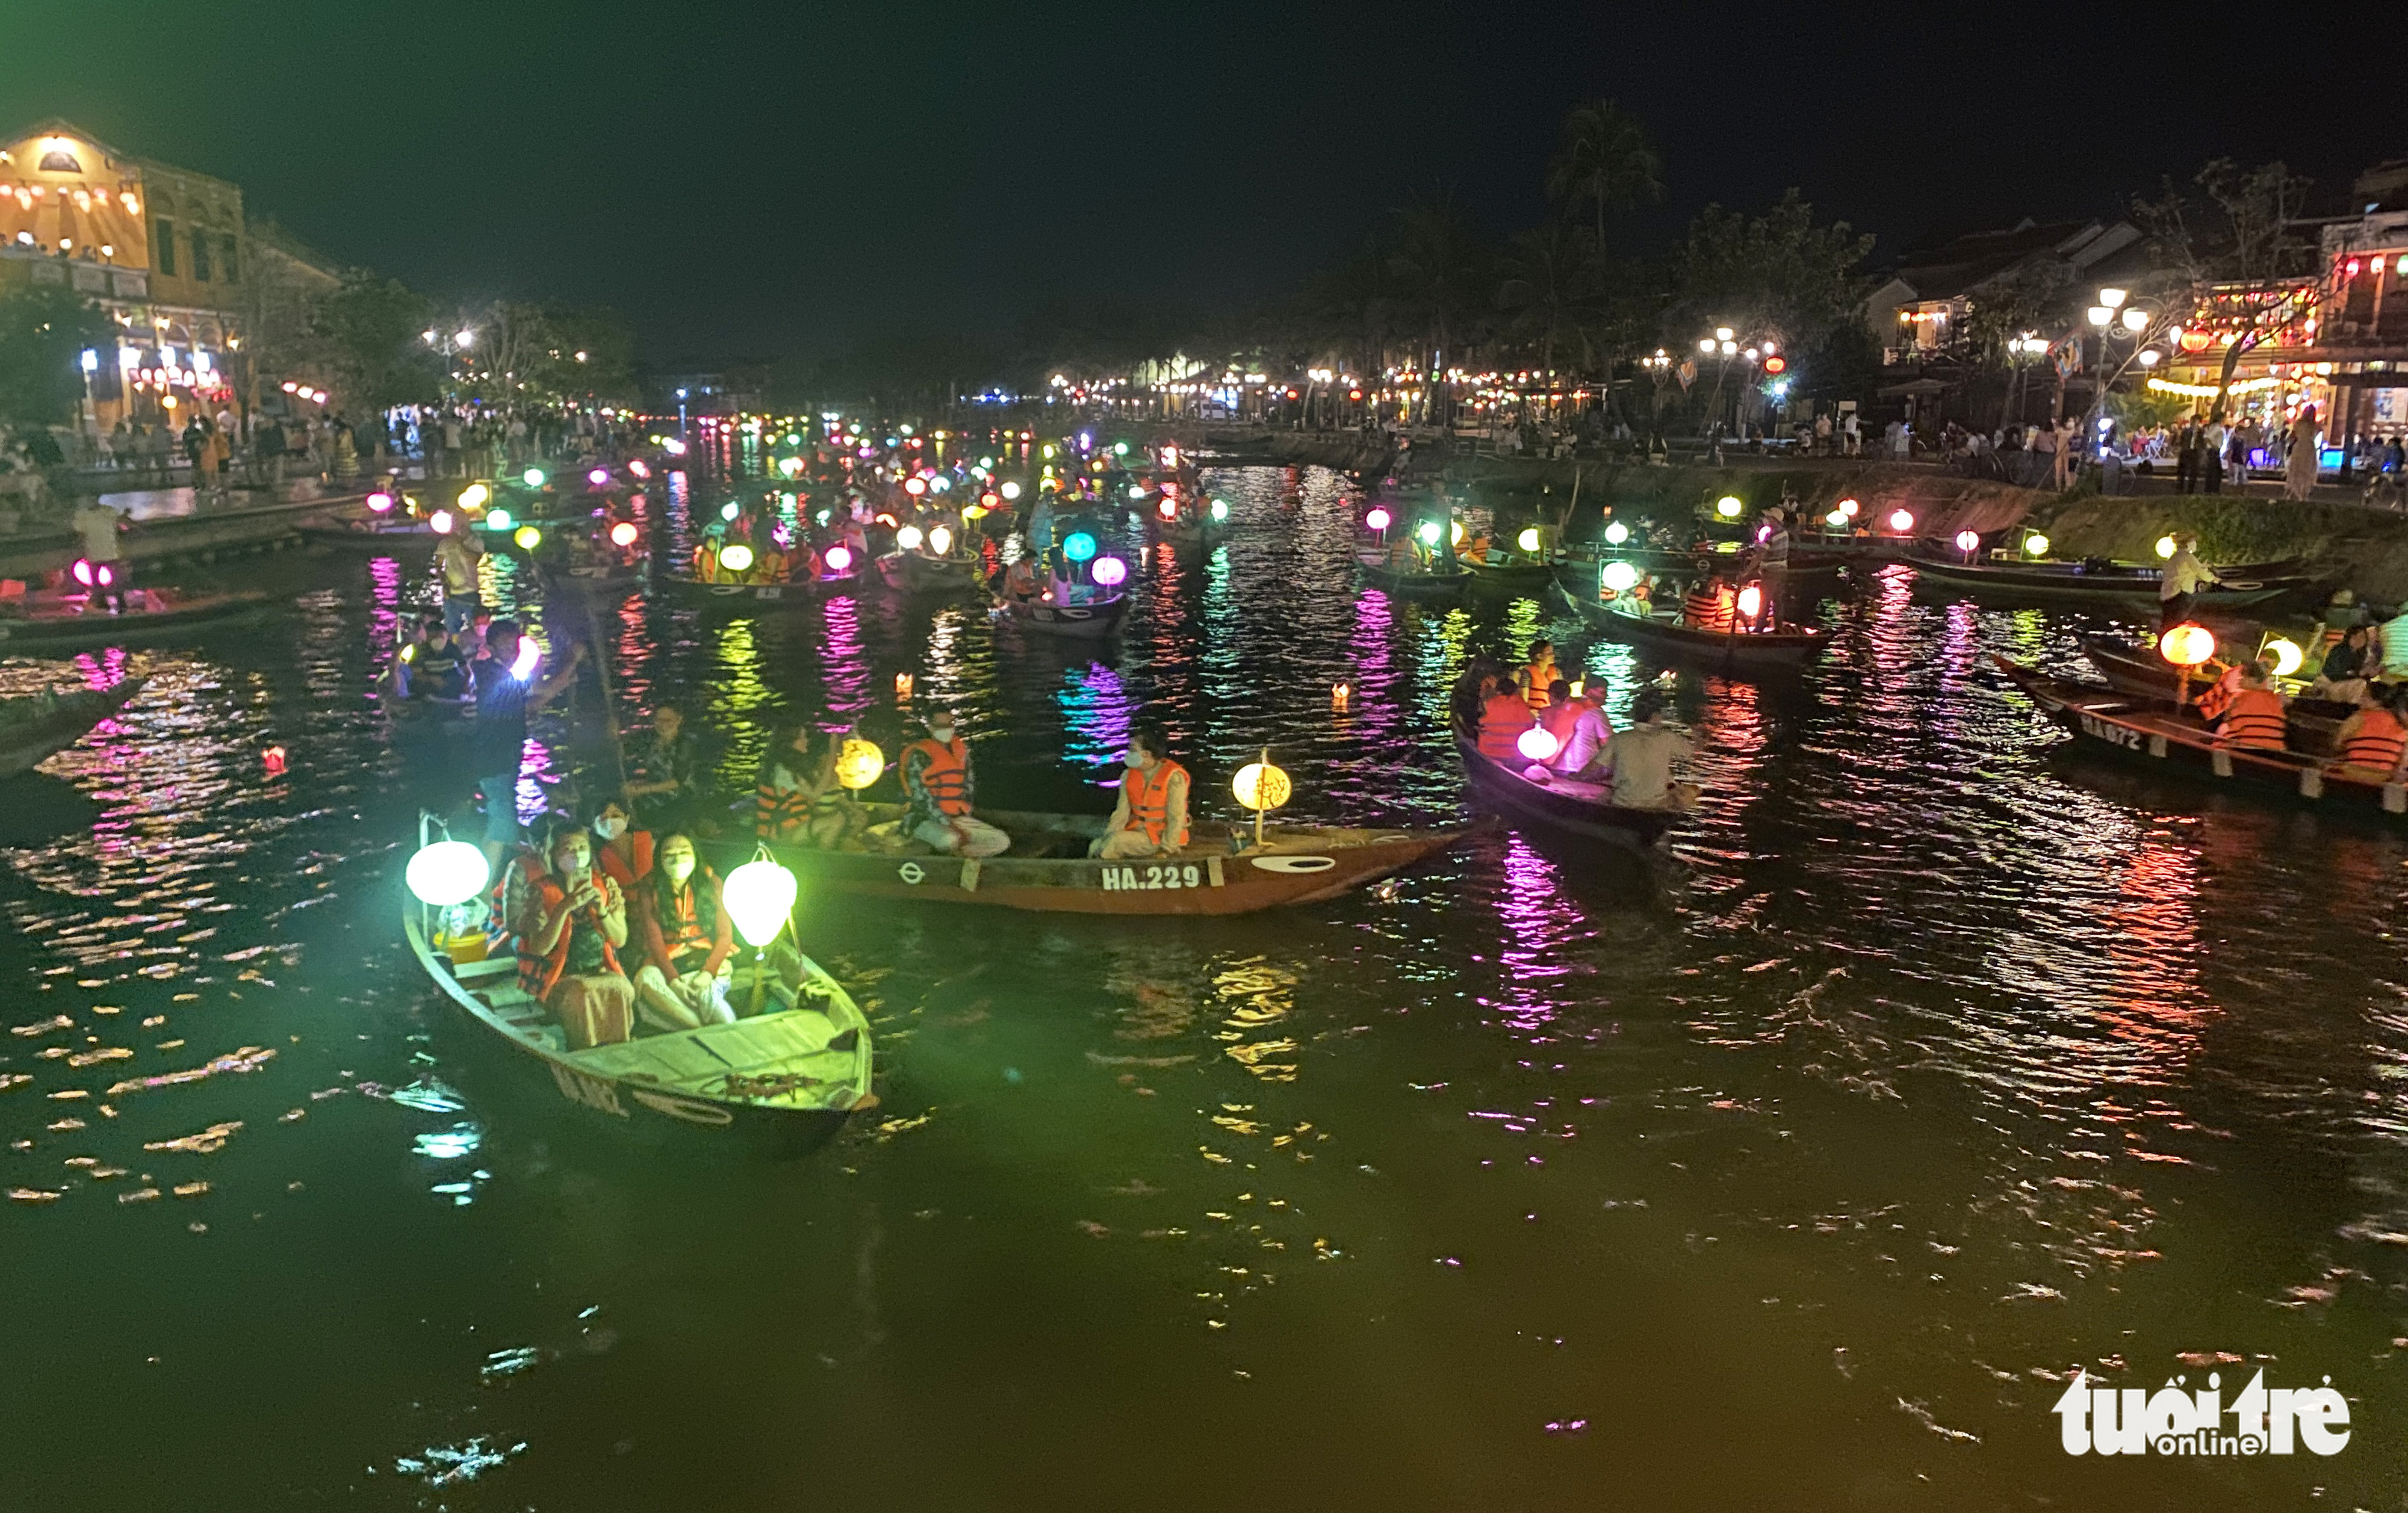 Vietnam’s Hoi An crowded, bustling on opening night of National Tourism Year